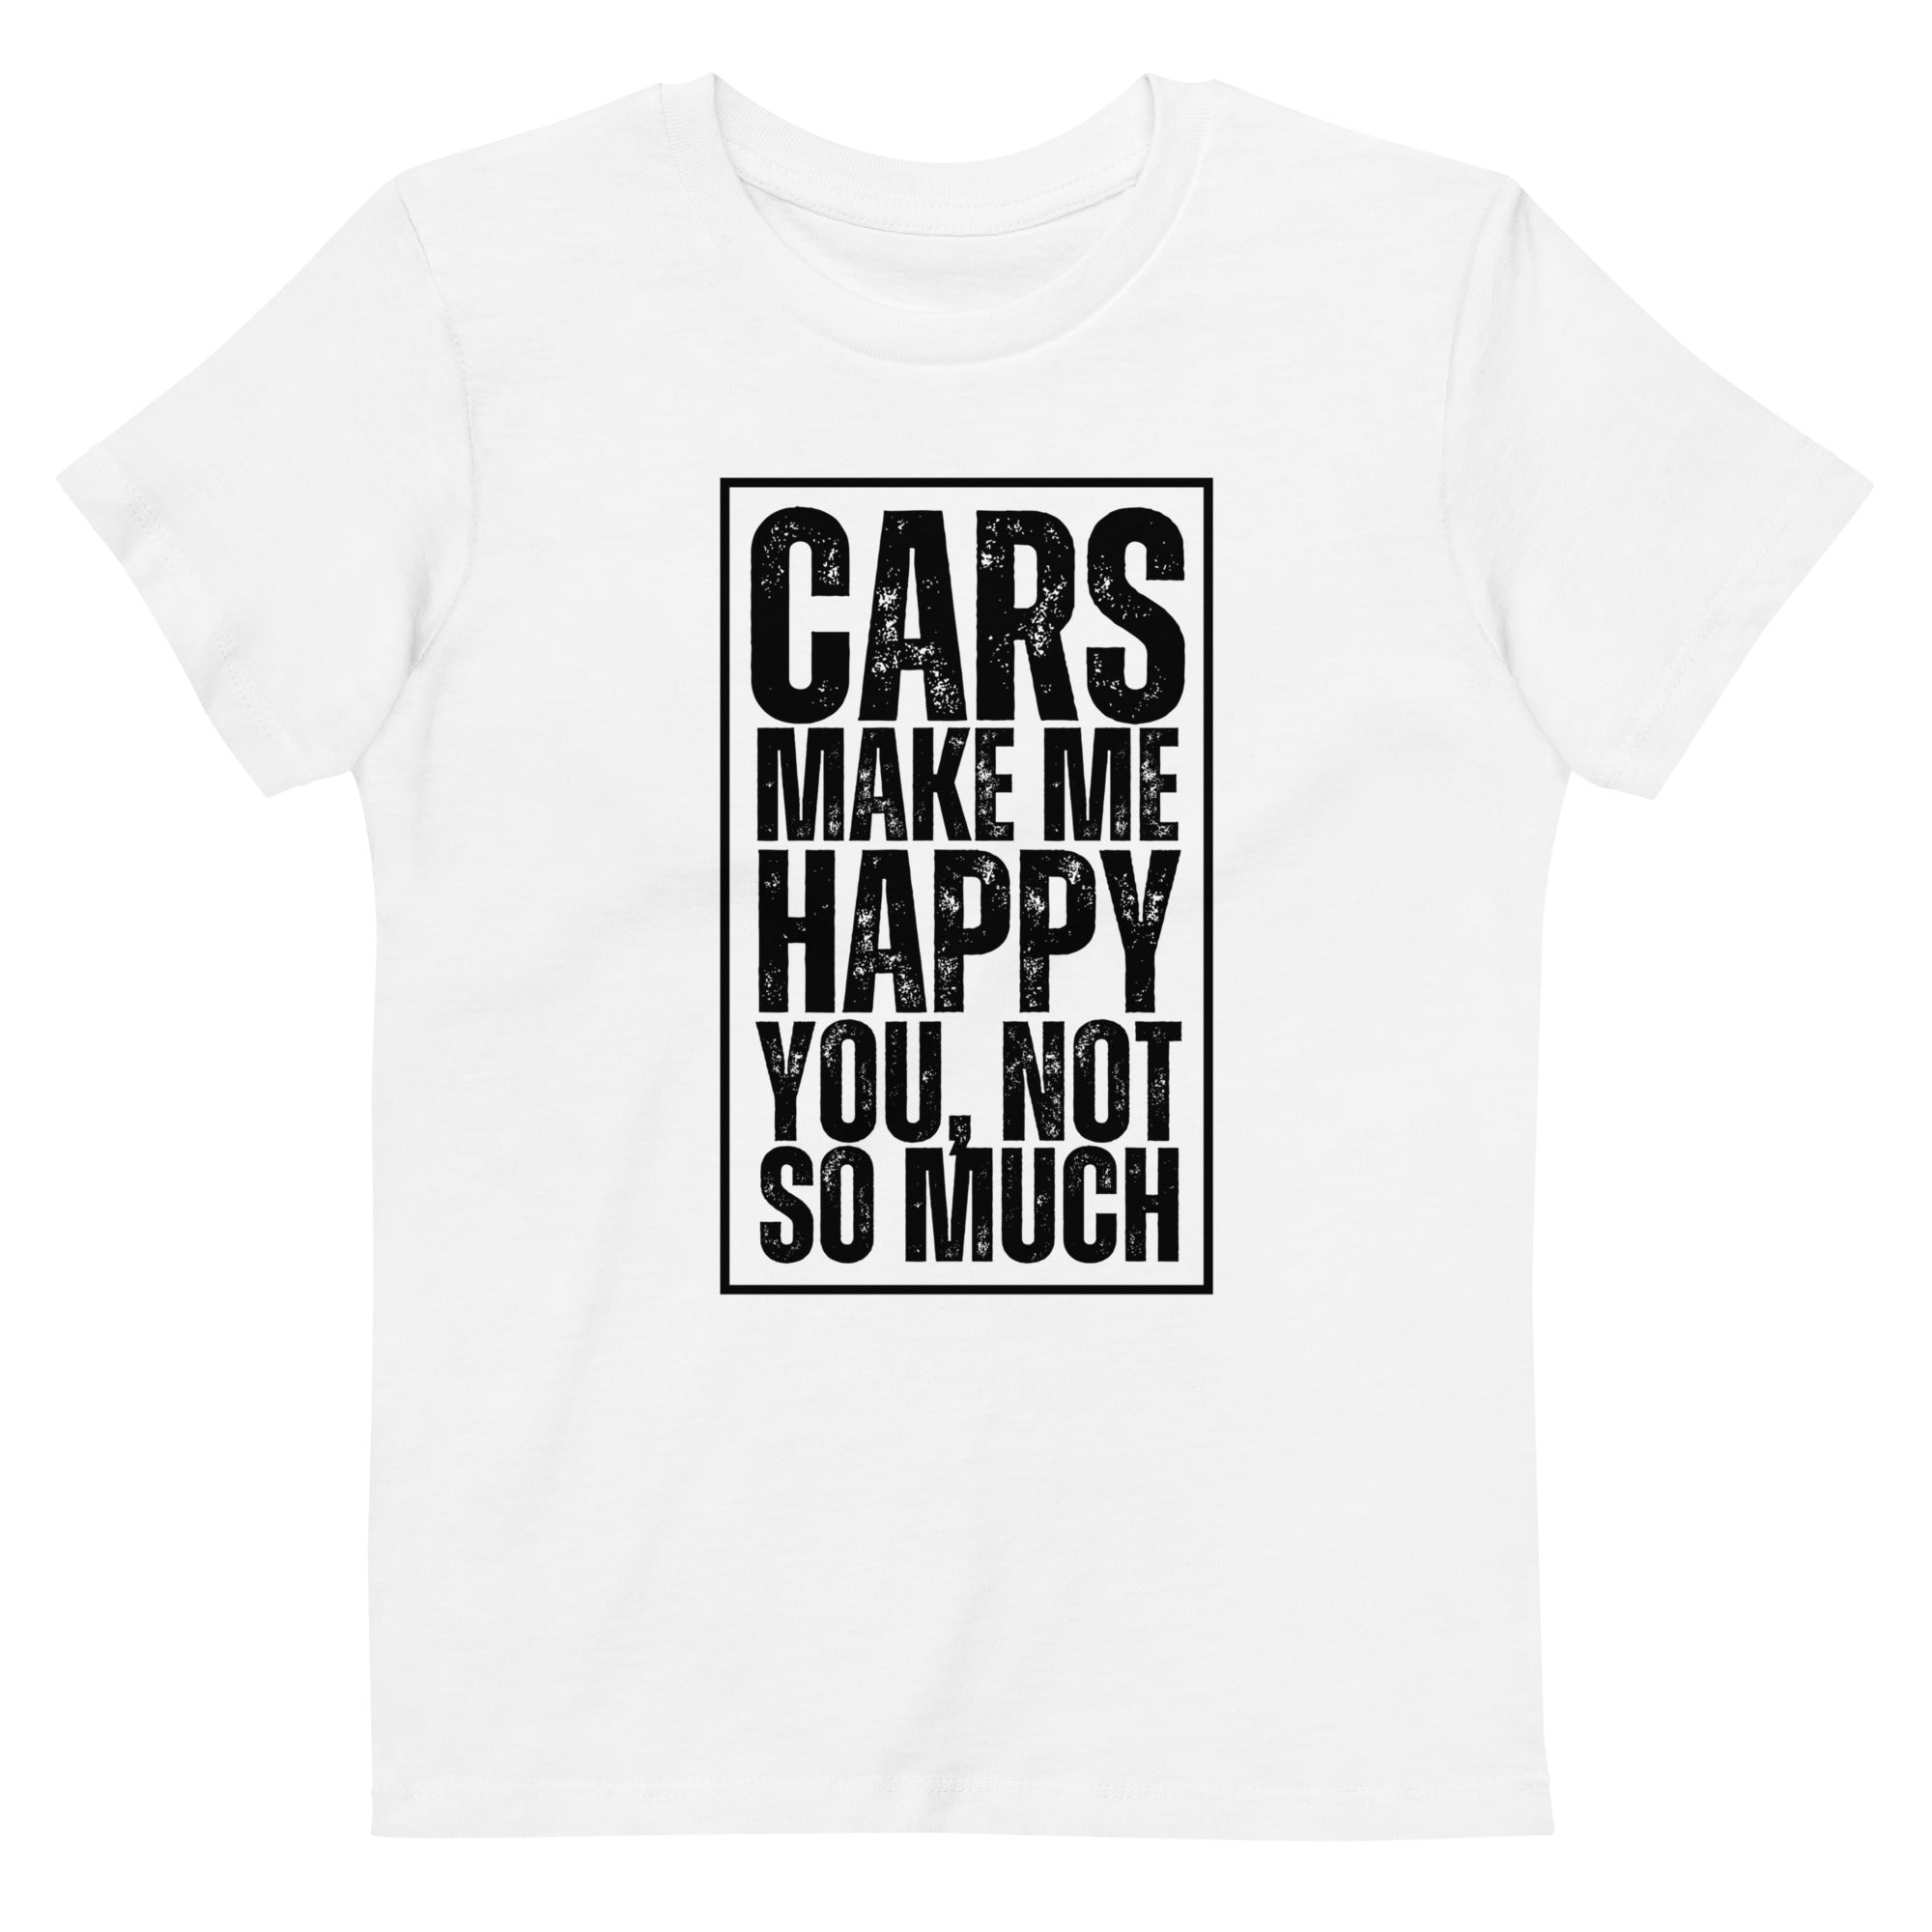 Cars Make Me Happy. You, Not So Much - Kids